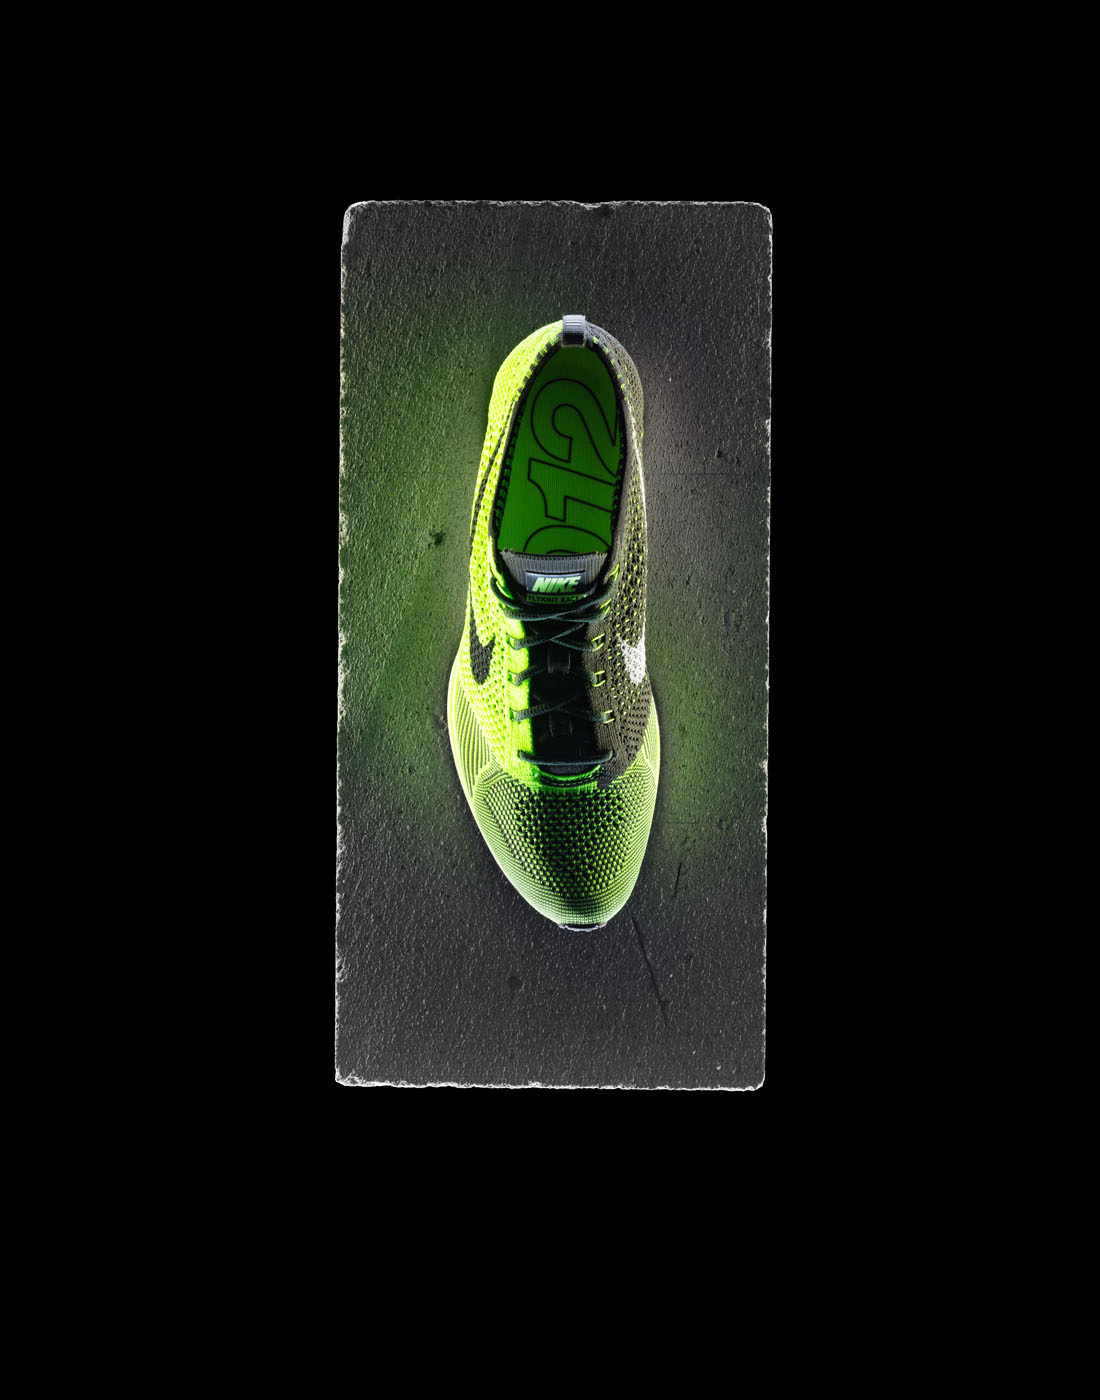 Nike running shoe on concrete block by Alexander Kent London based still life and product photographer.